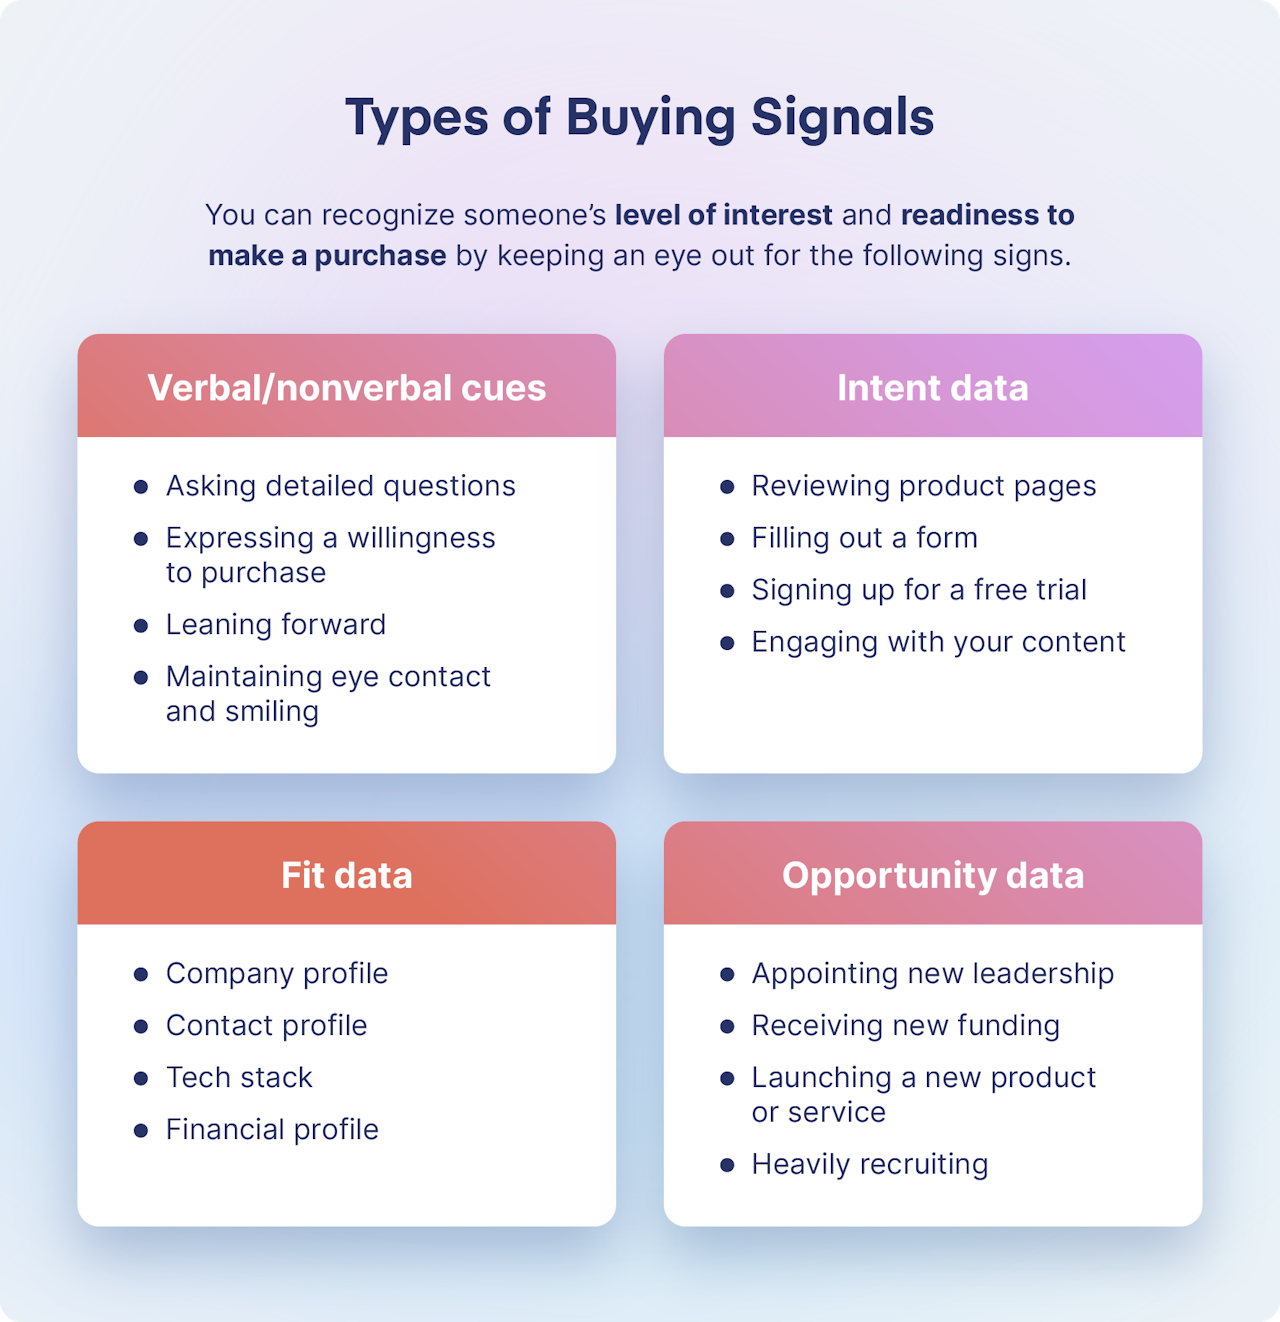 lead data: types of buying signals